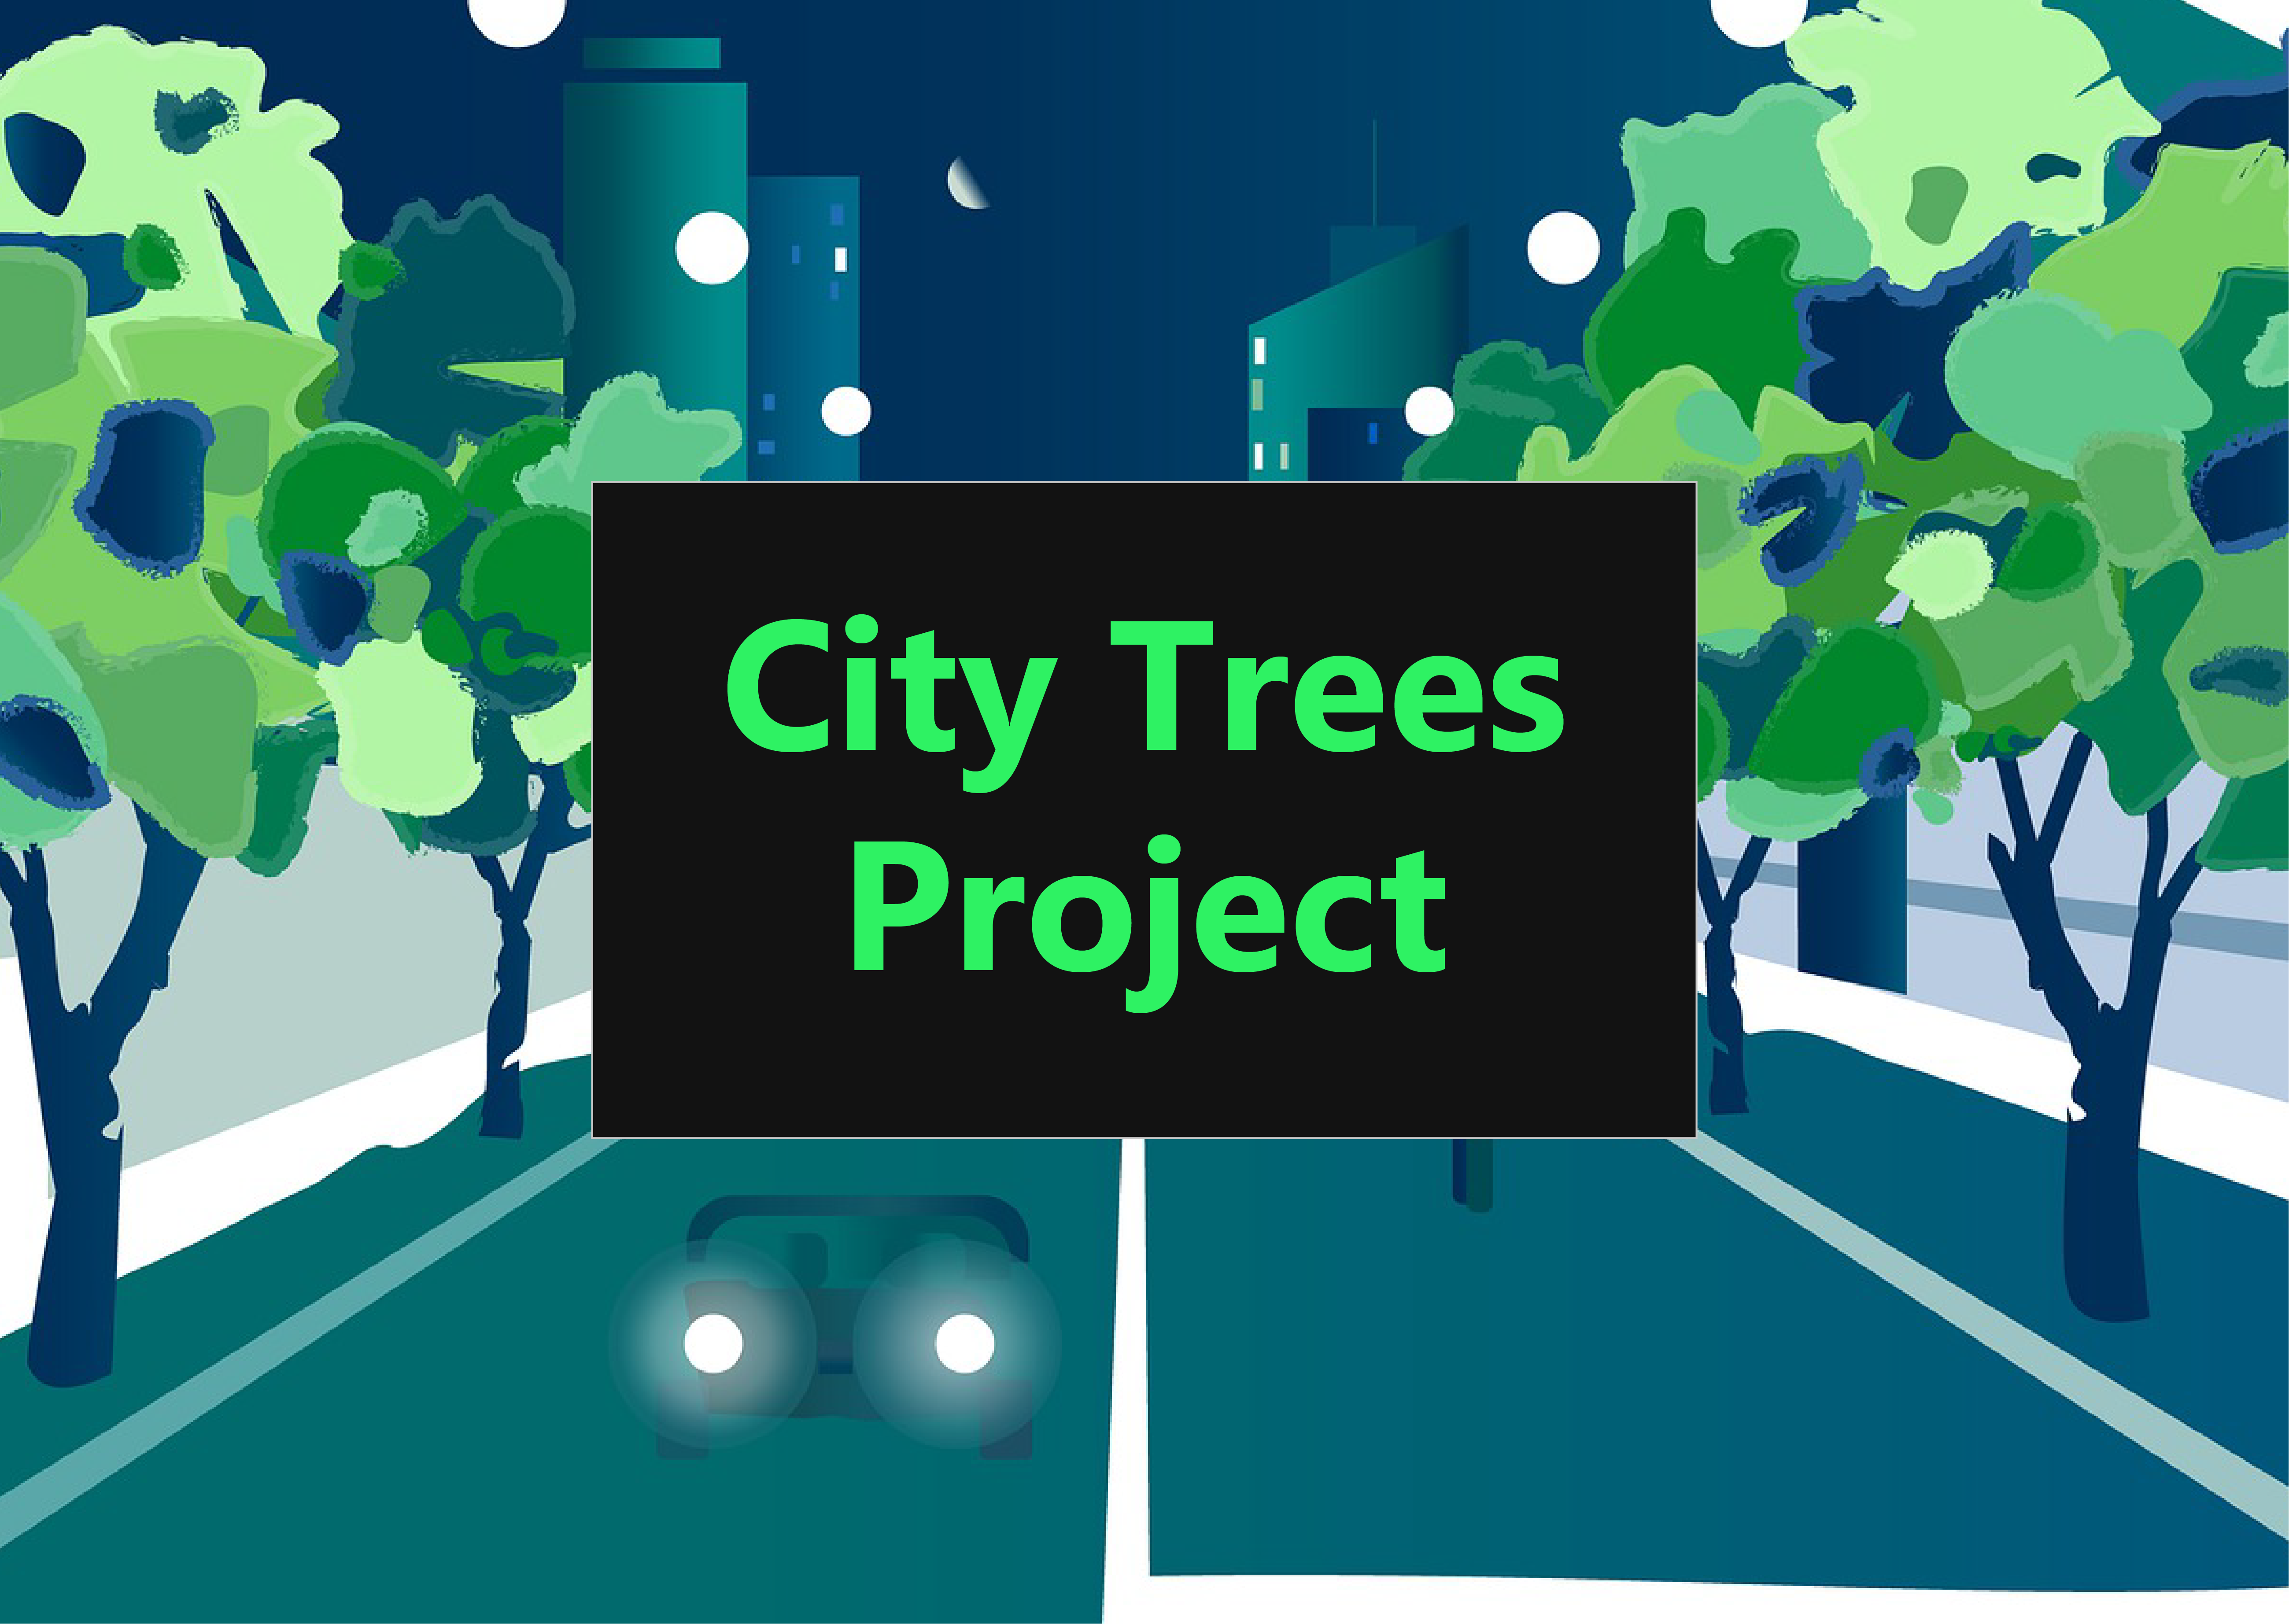 City Trees Project